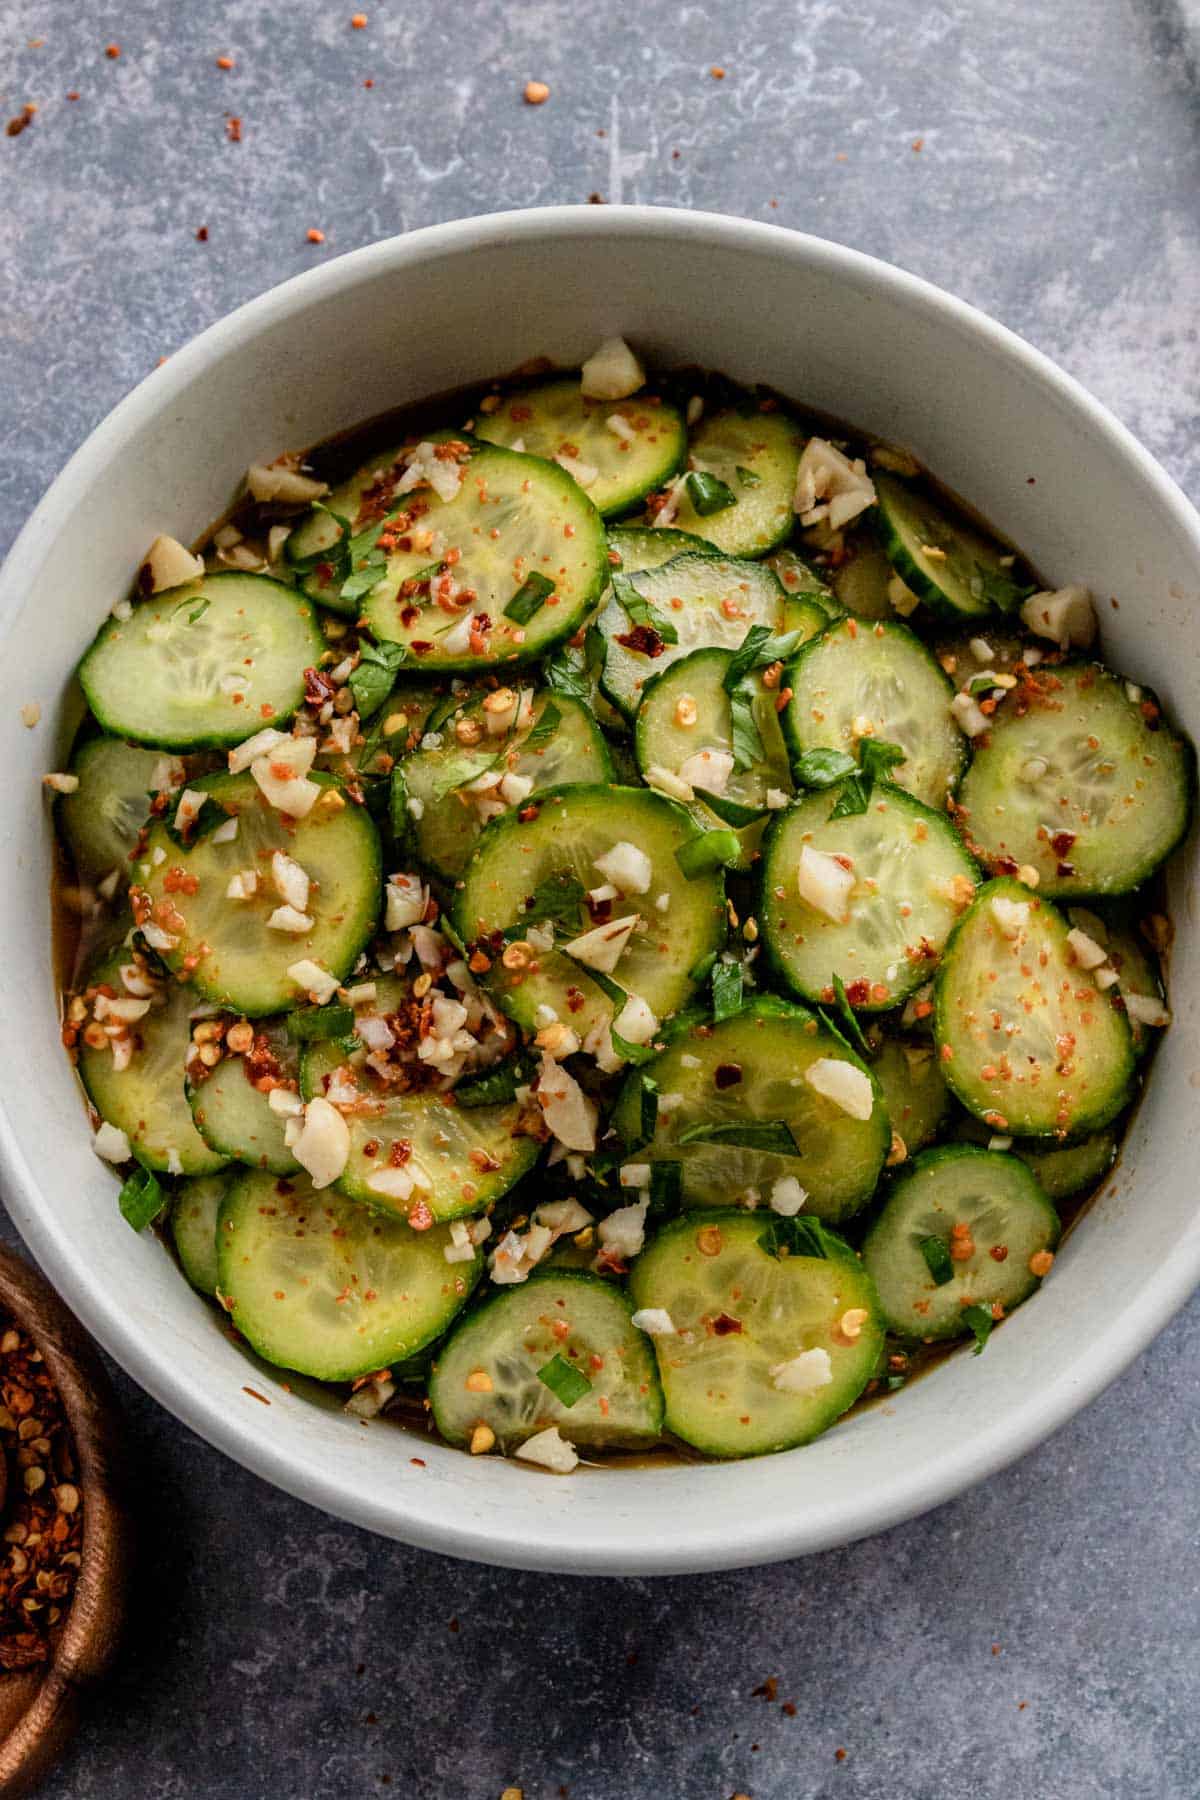 spicy cucumber salad with peanuts in a bowl